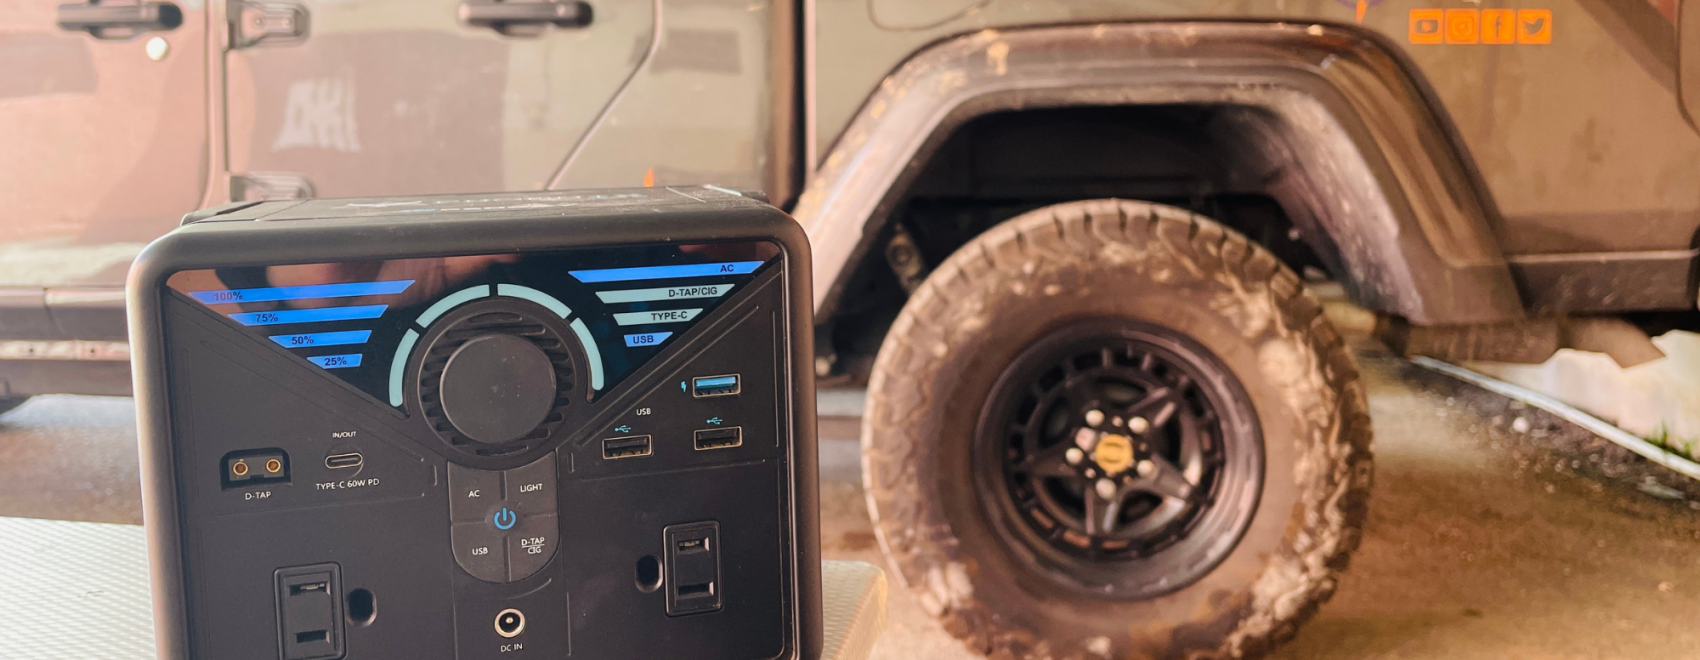 Portable Power Station for Overlanding Gear Review